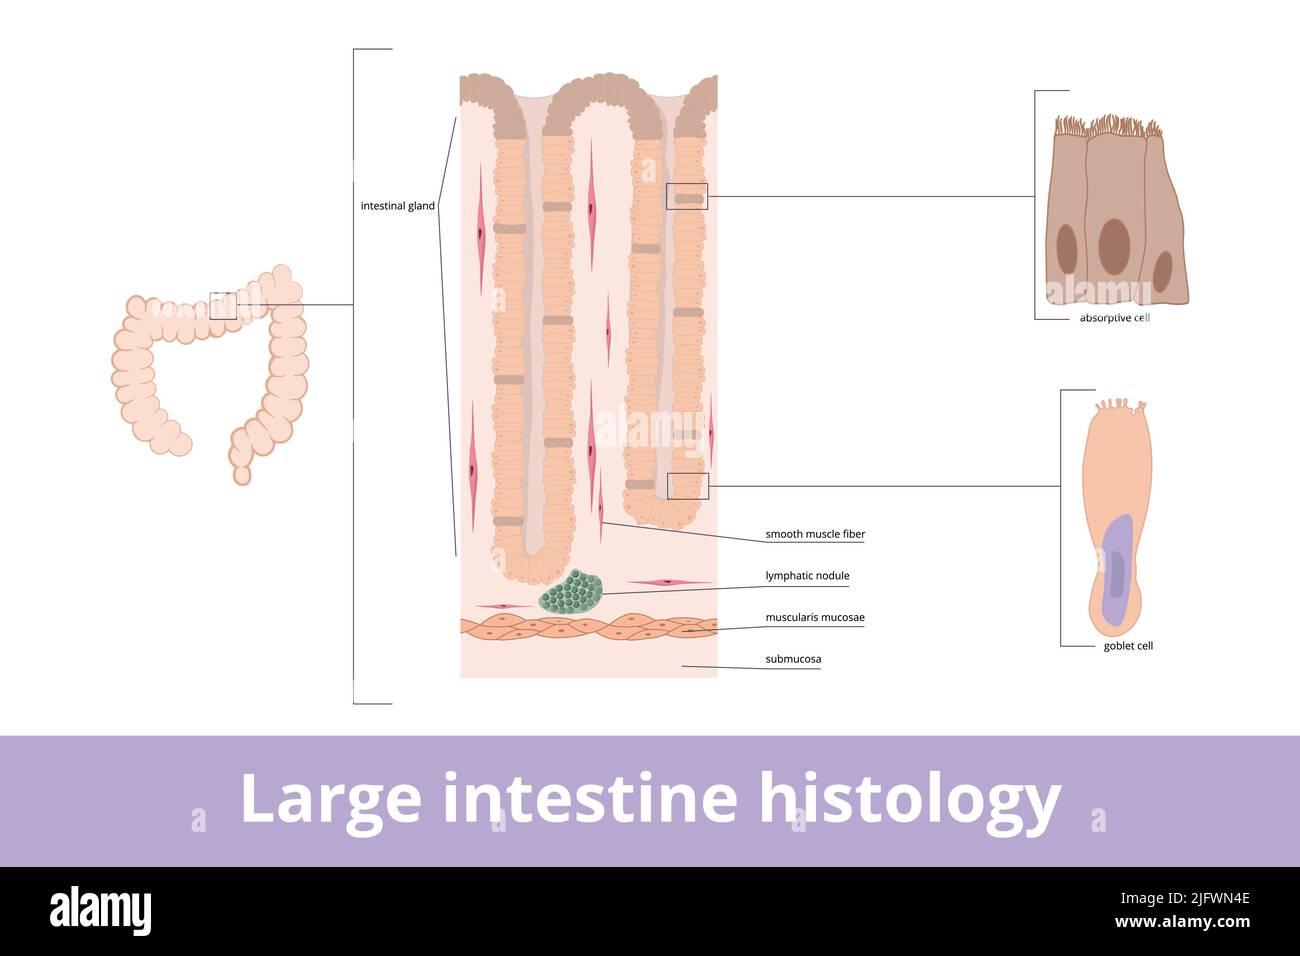 Large intestine histology. Tissue with visualized intestinal gland, fibers, absorptive cell, and goblet cell. Stock Vector